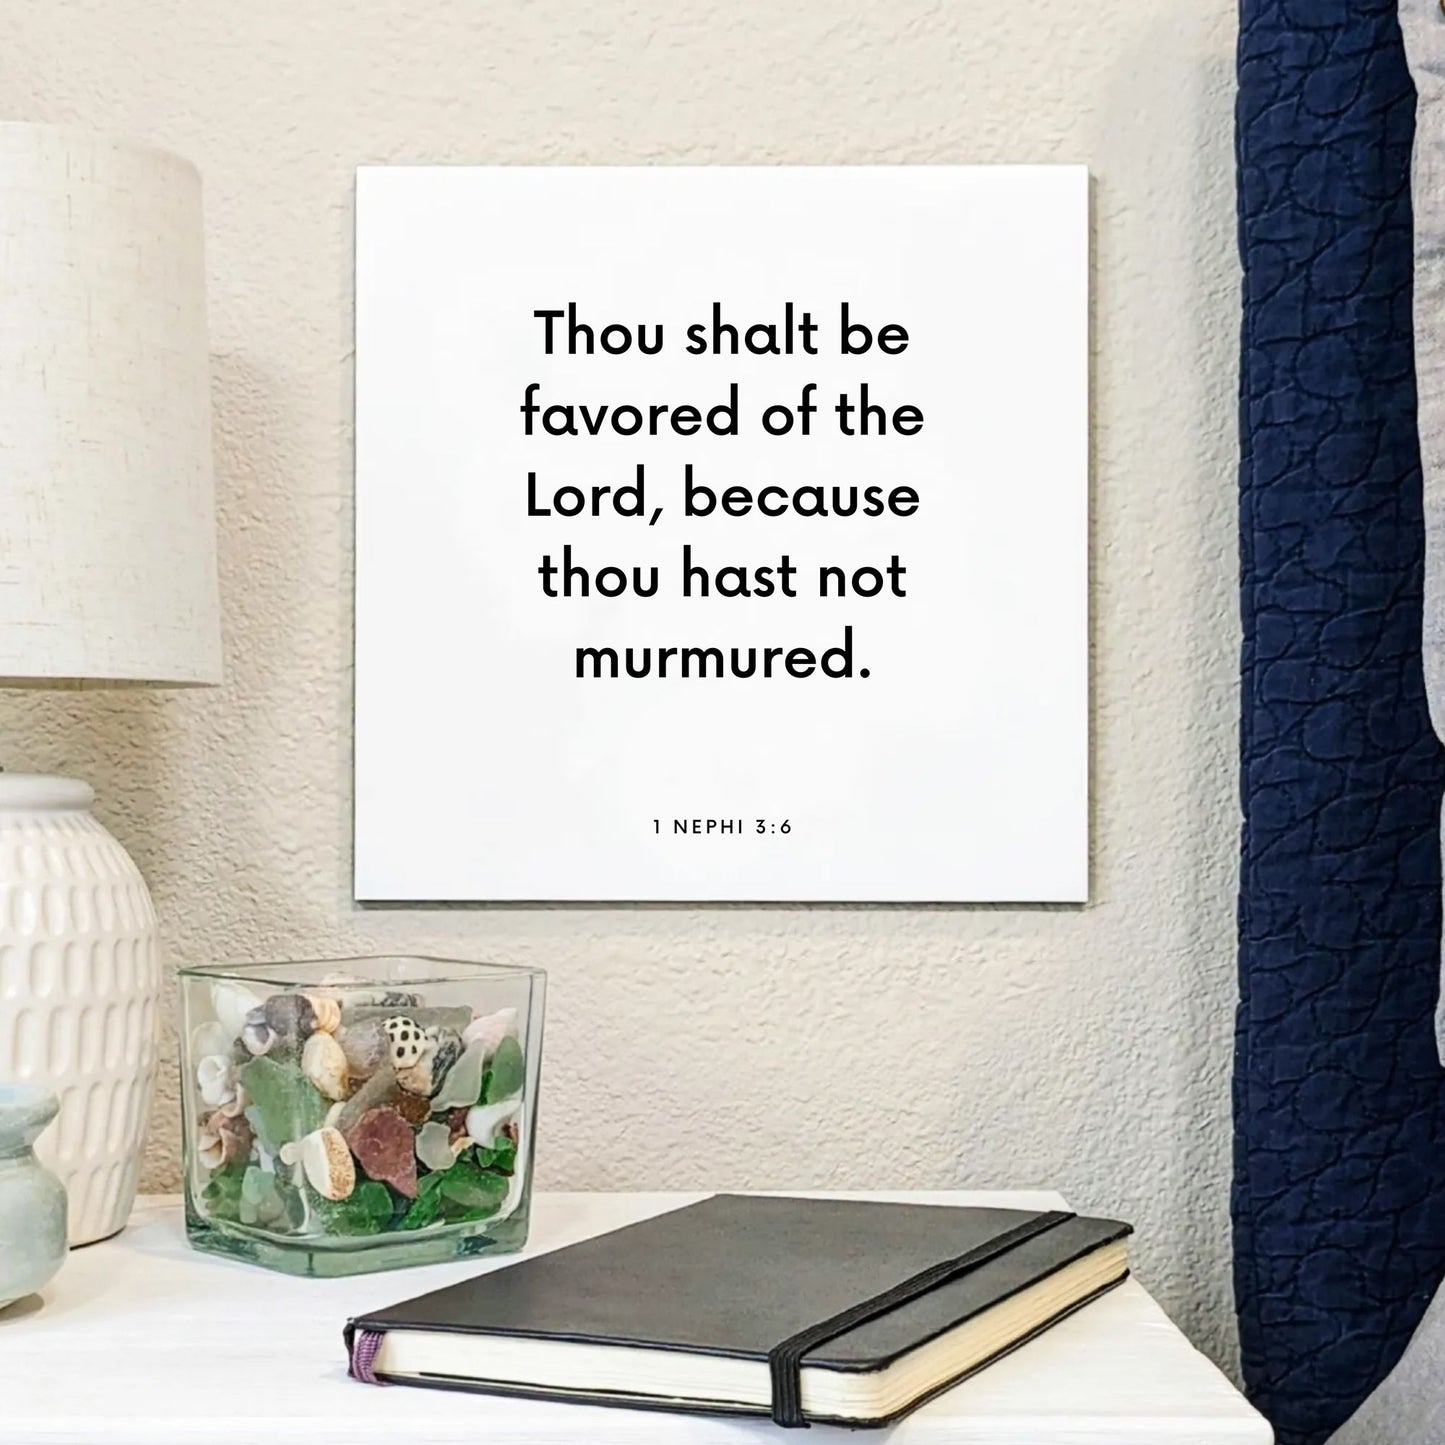 Bedside mouting of the scripture tile for 1 Nephi 3:6 - "Thou shalt be favored of the Lord"